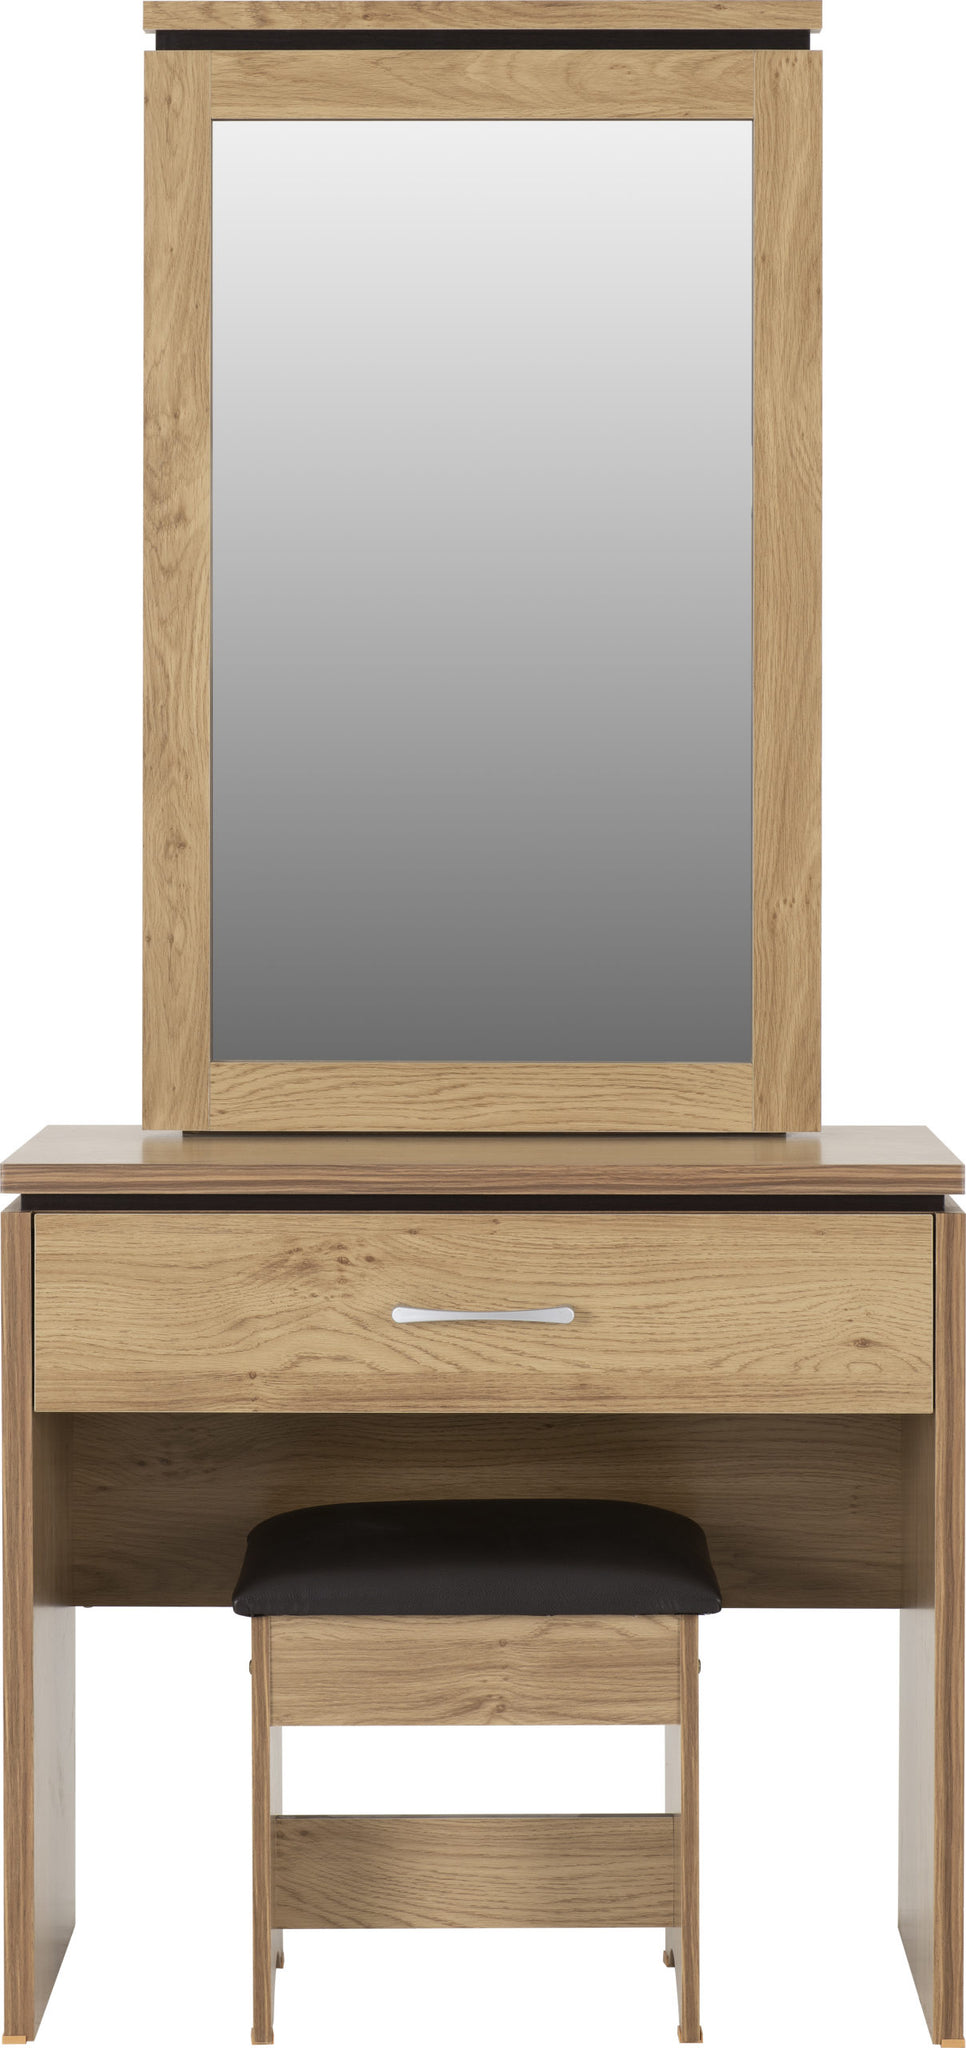 Charles 1 Drawer Dressing Table Set - The Right Buy Store